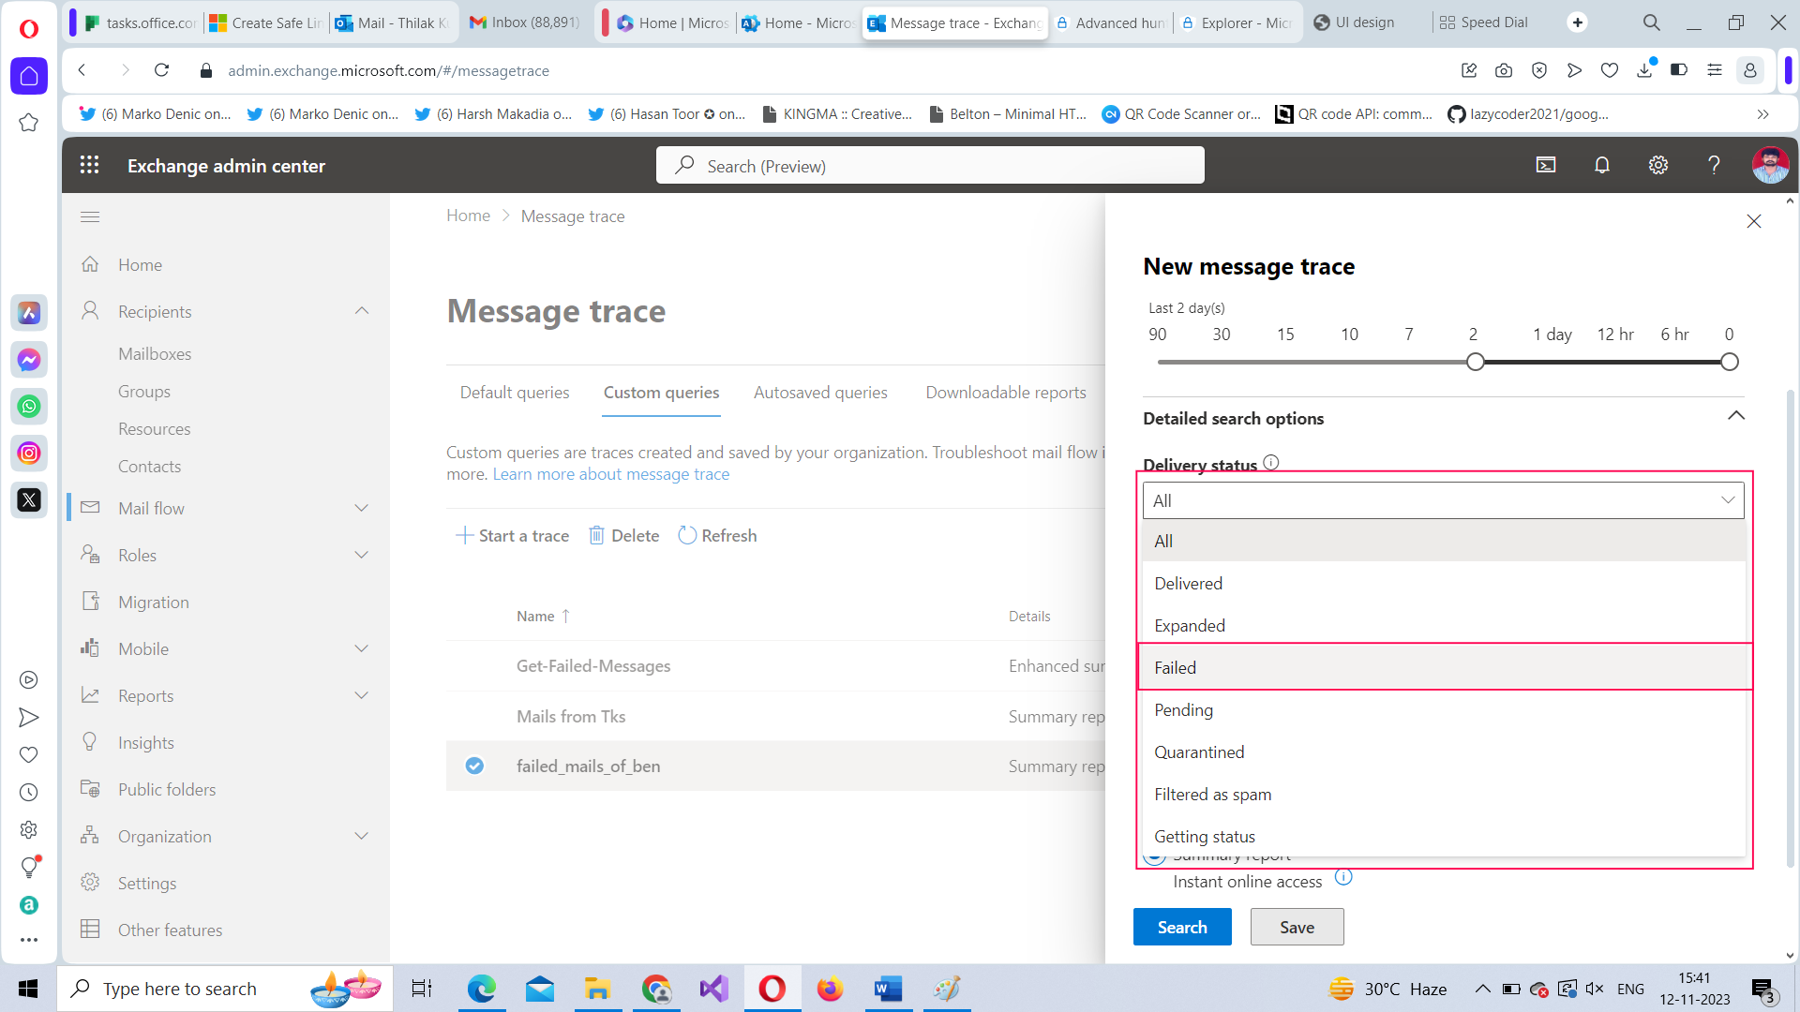 This screenshot shows setting the delivery status of the message trace as failed. 